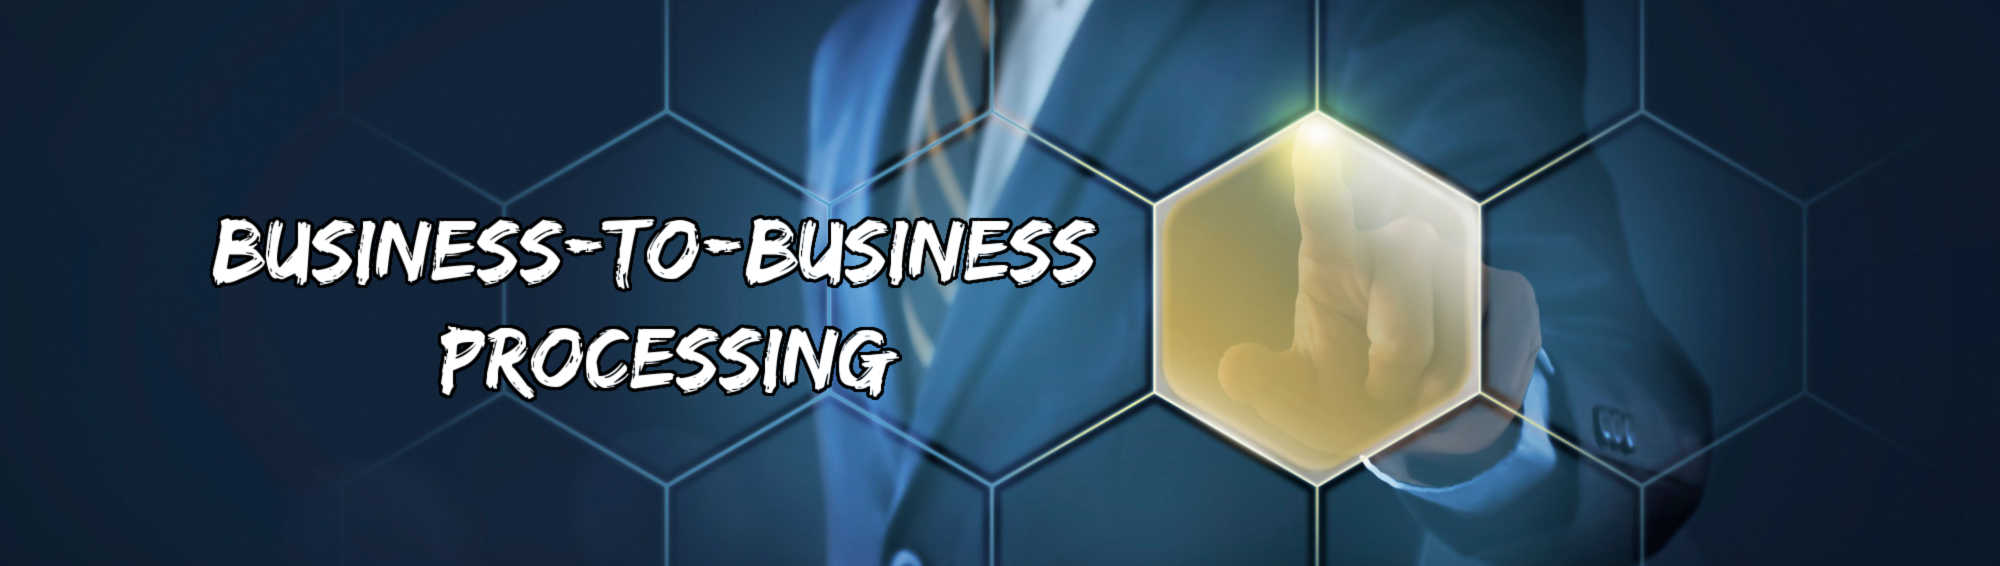 image of business to business processing